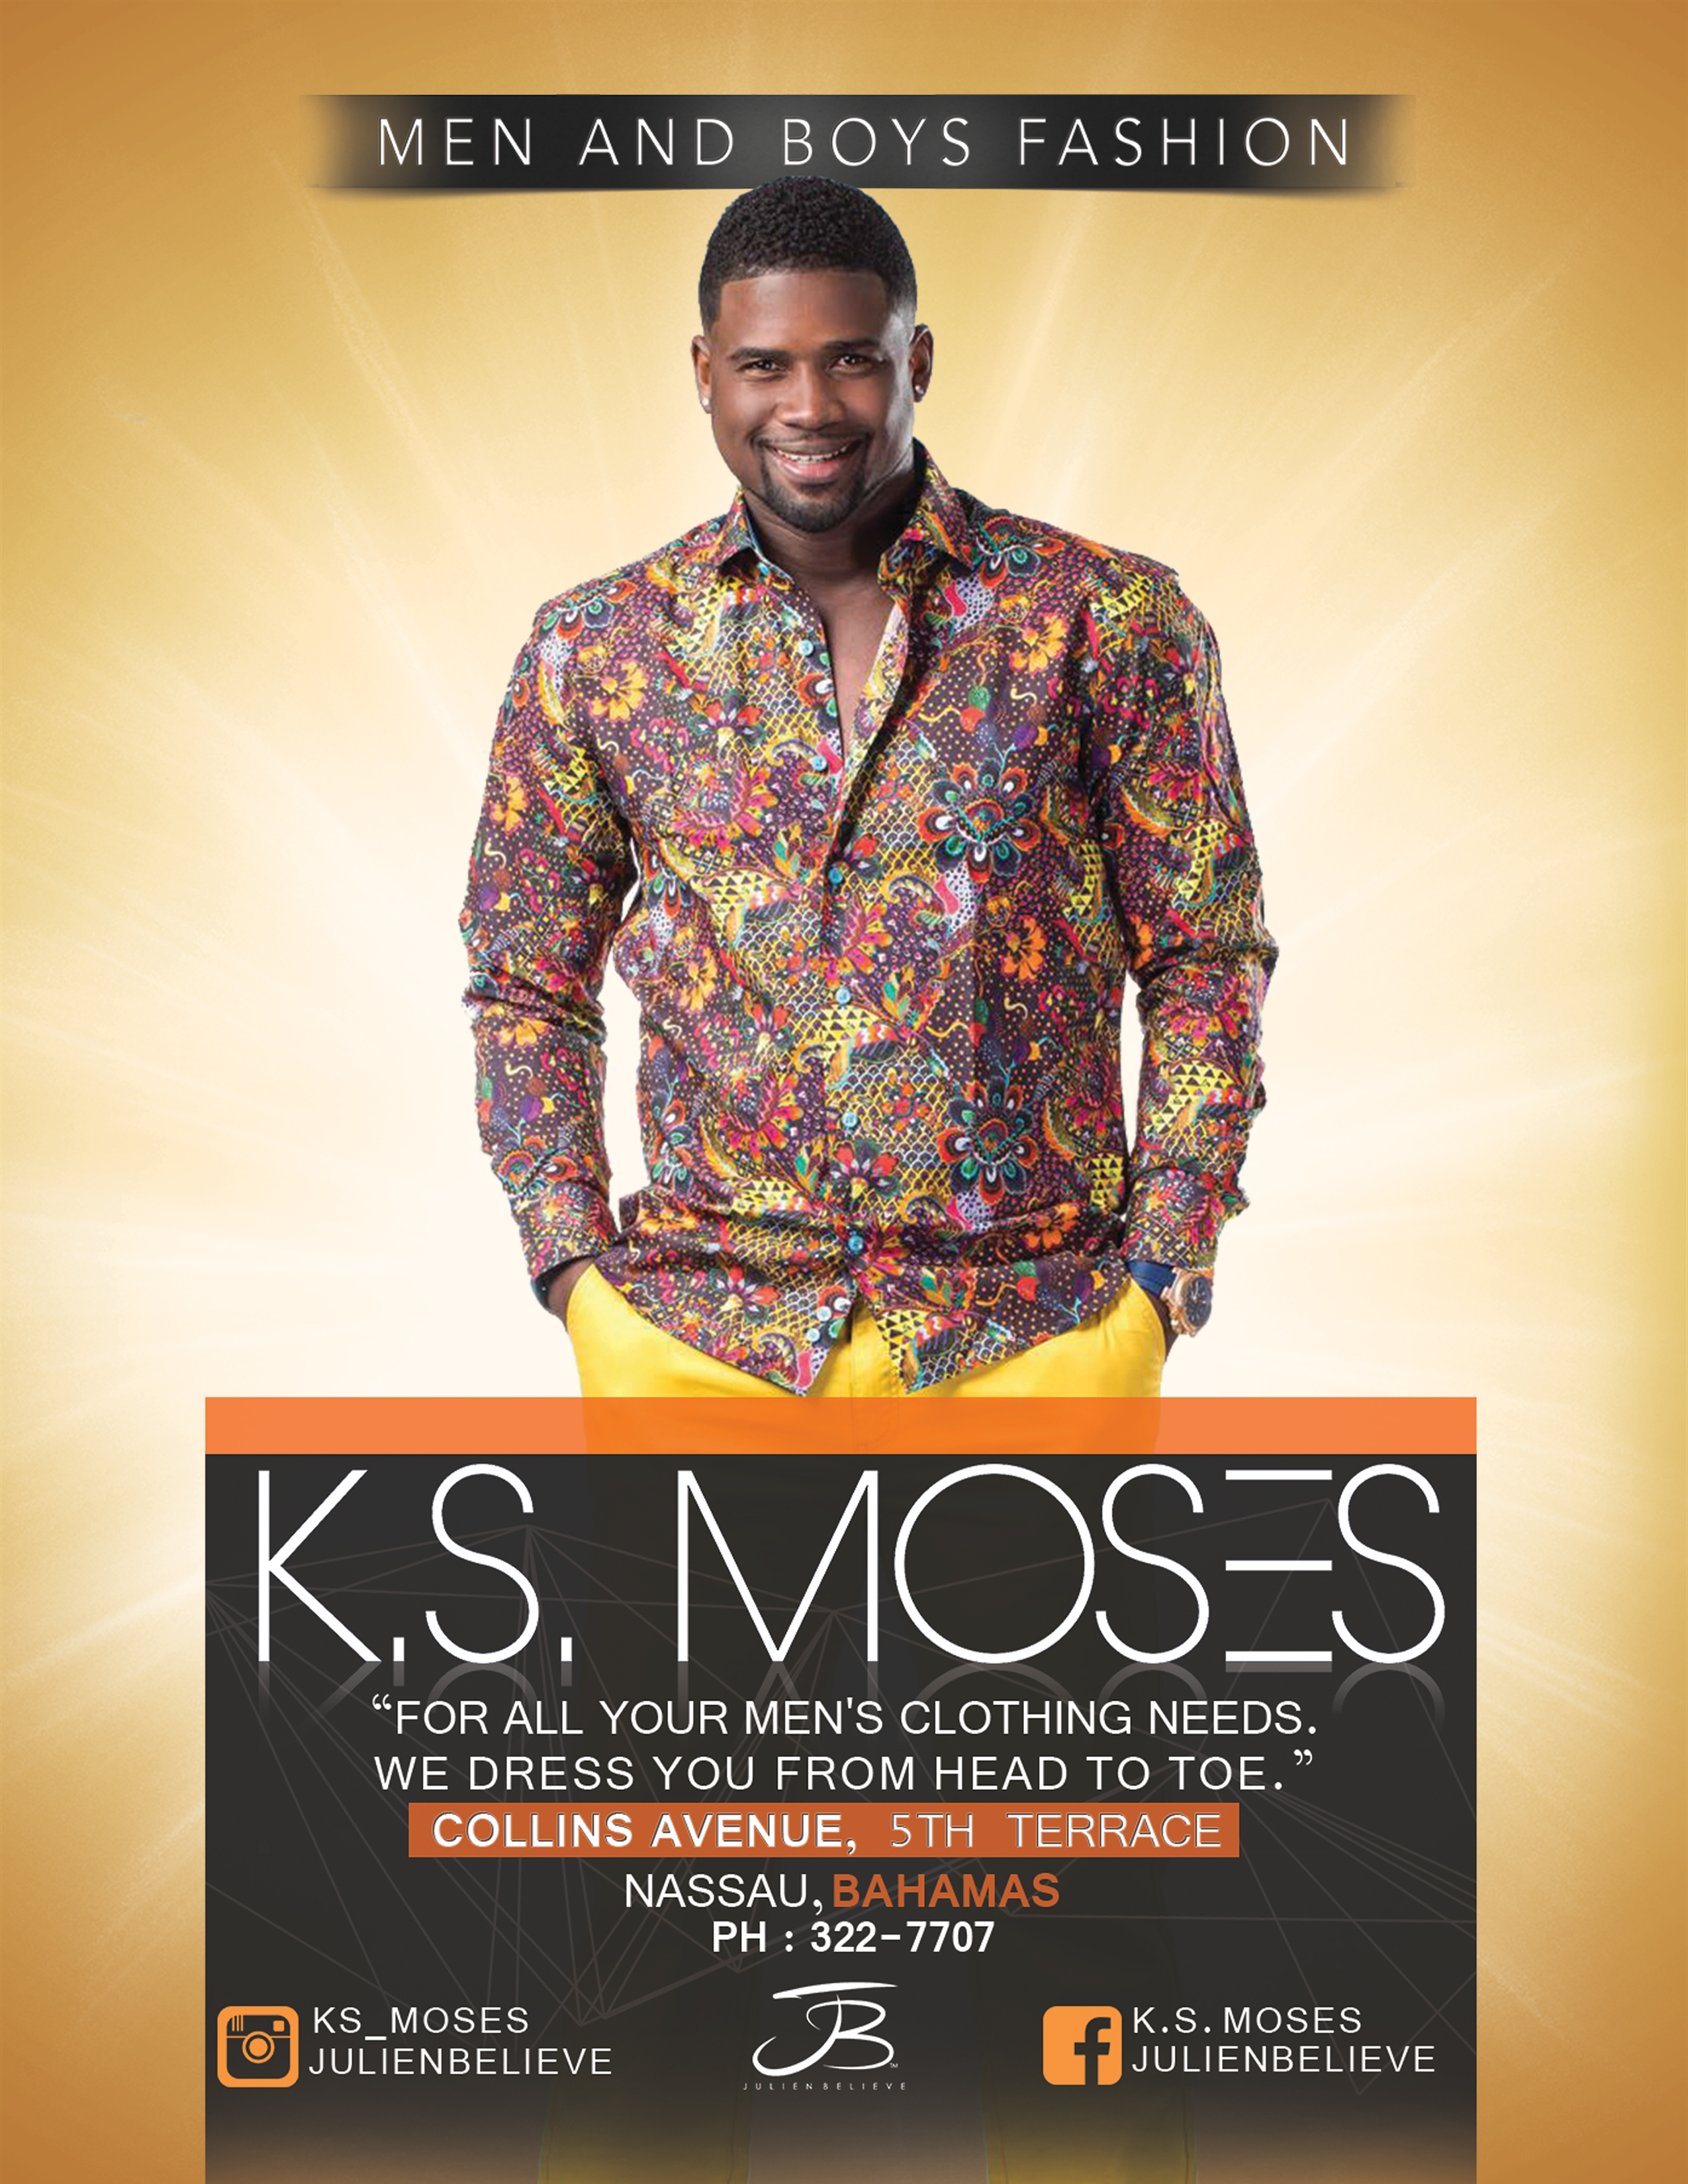 Julien Believe, the new face of K.S. Moses